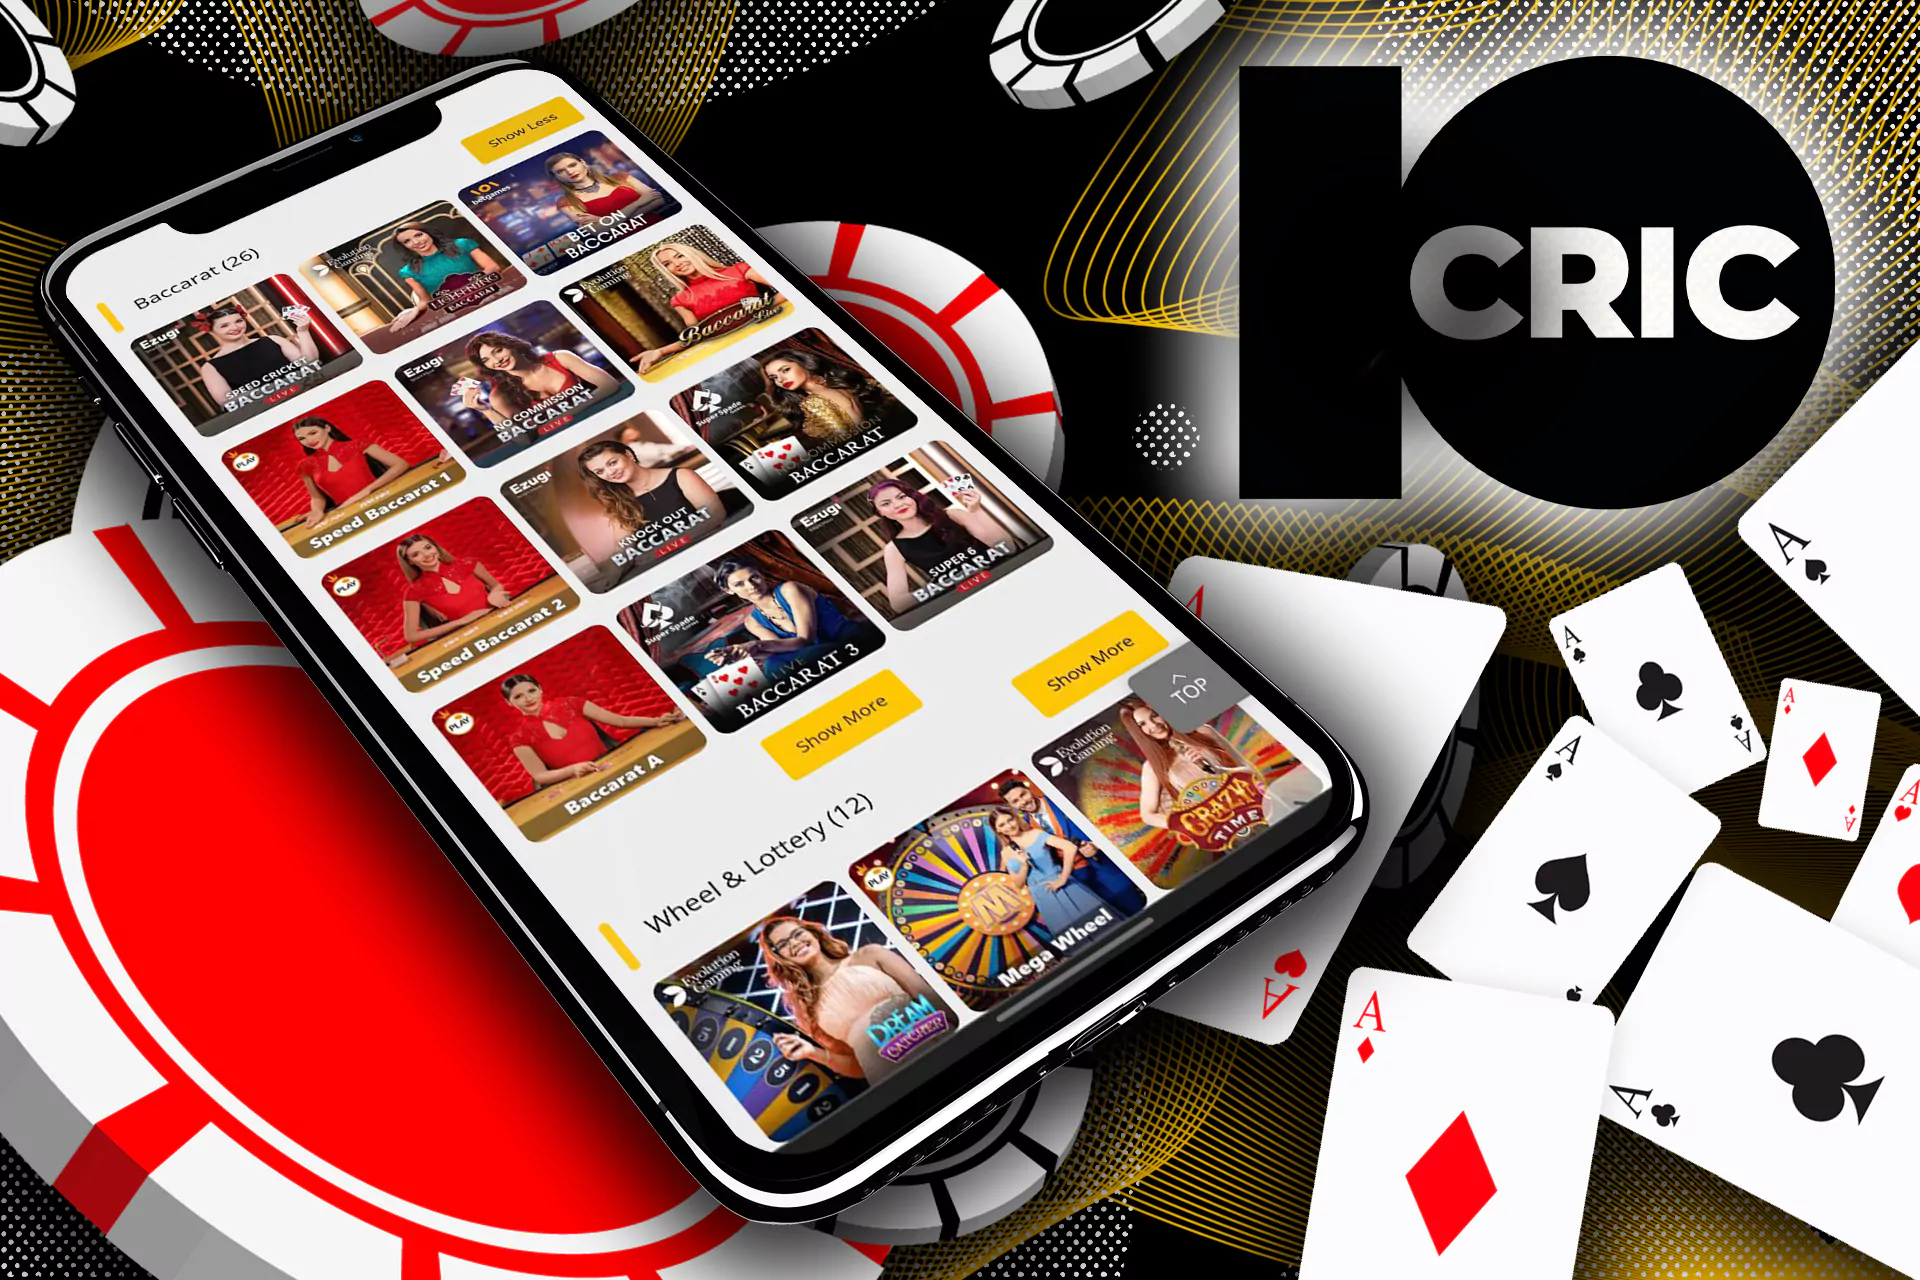 The traditional Indian card game of baccarat is also presented in the 10cric casino section.